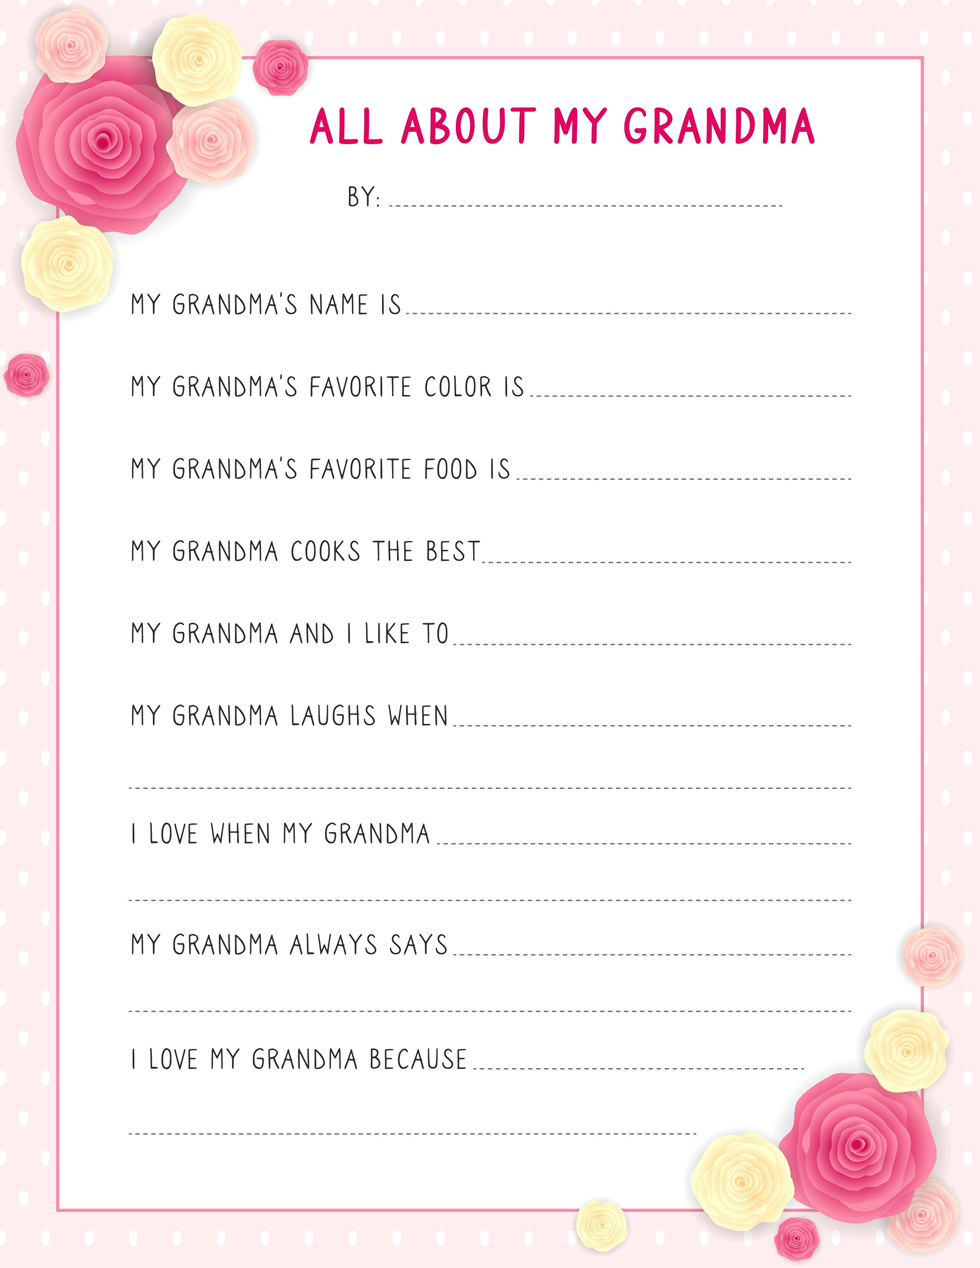 All about my Grandma - Mother's Day Printables